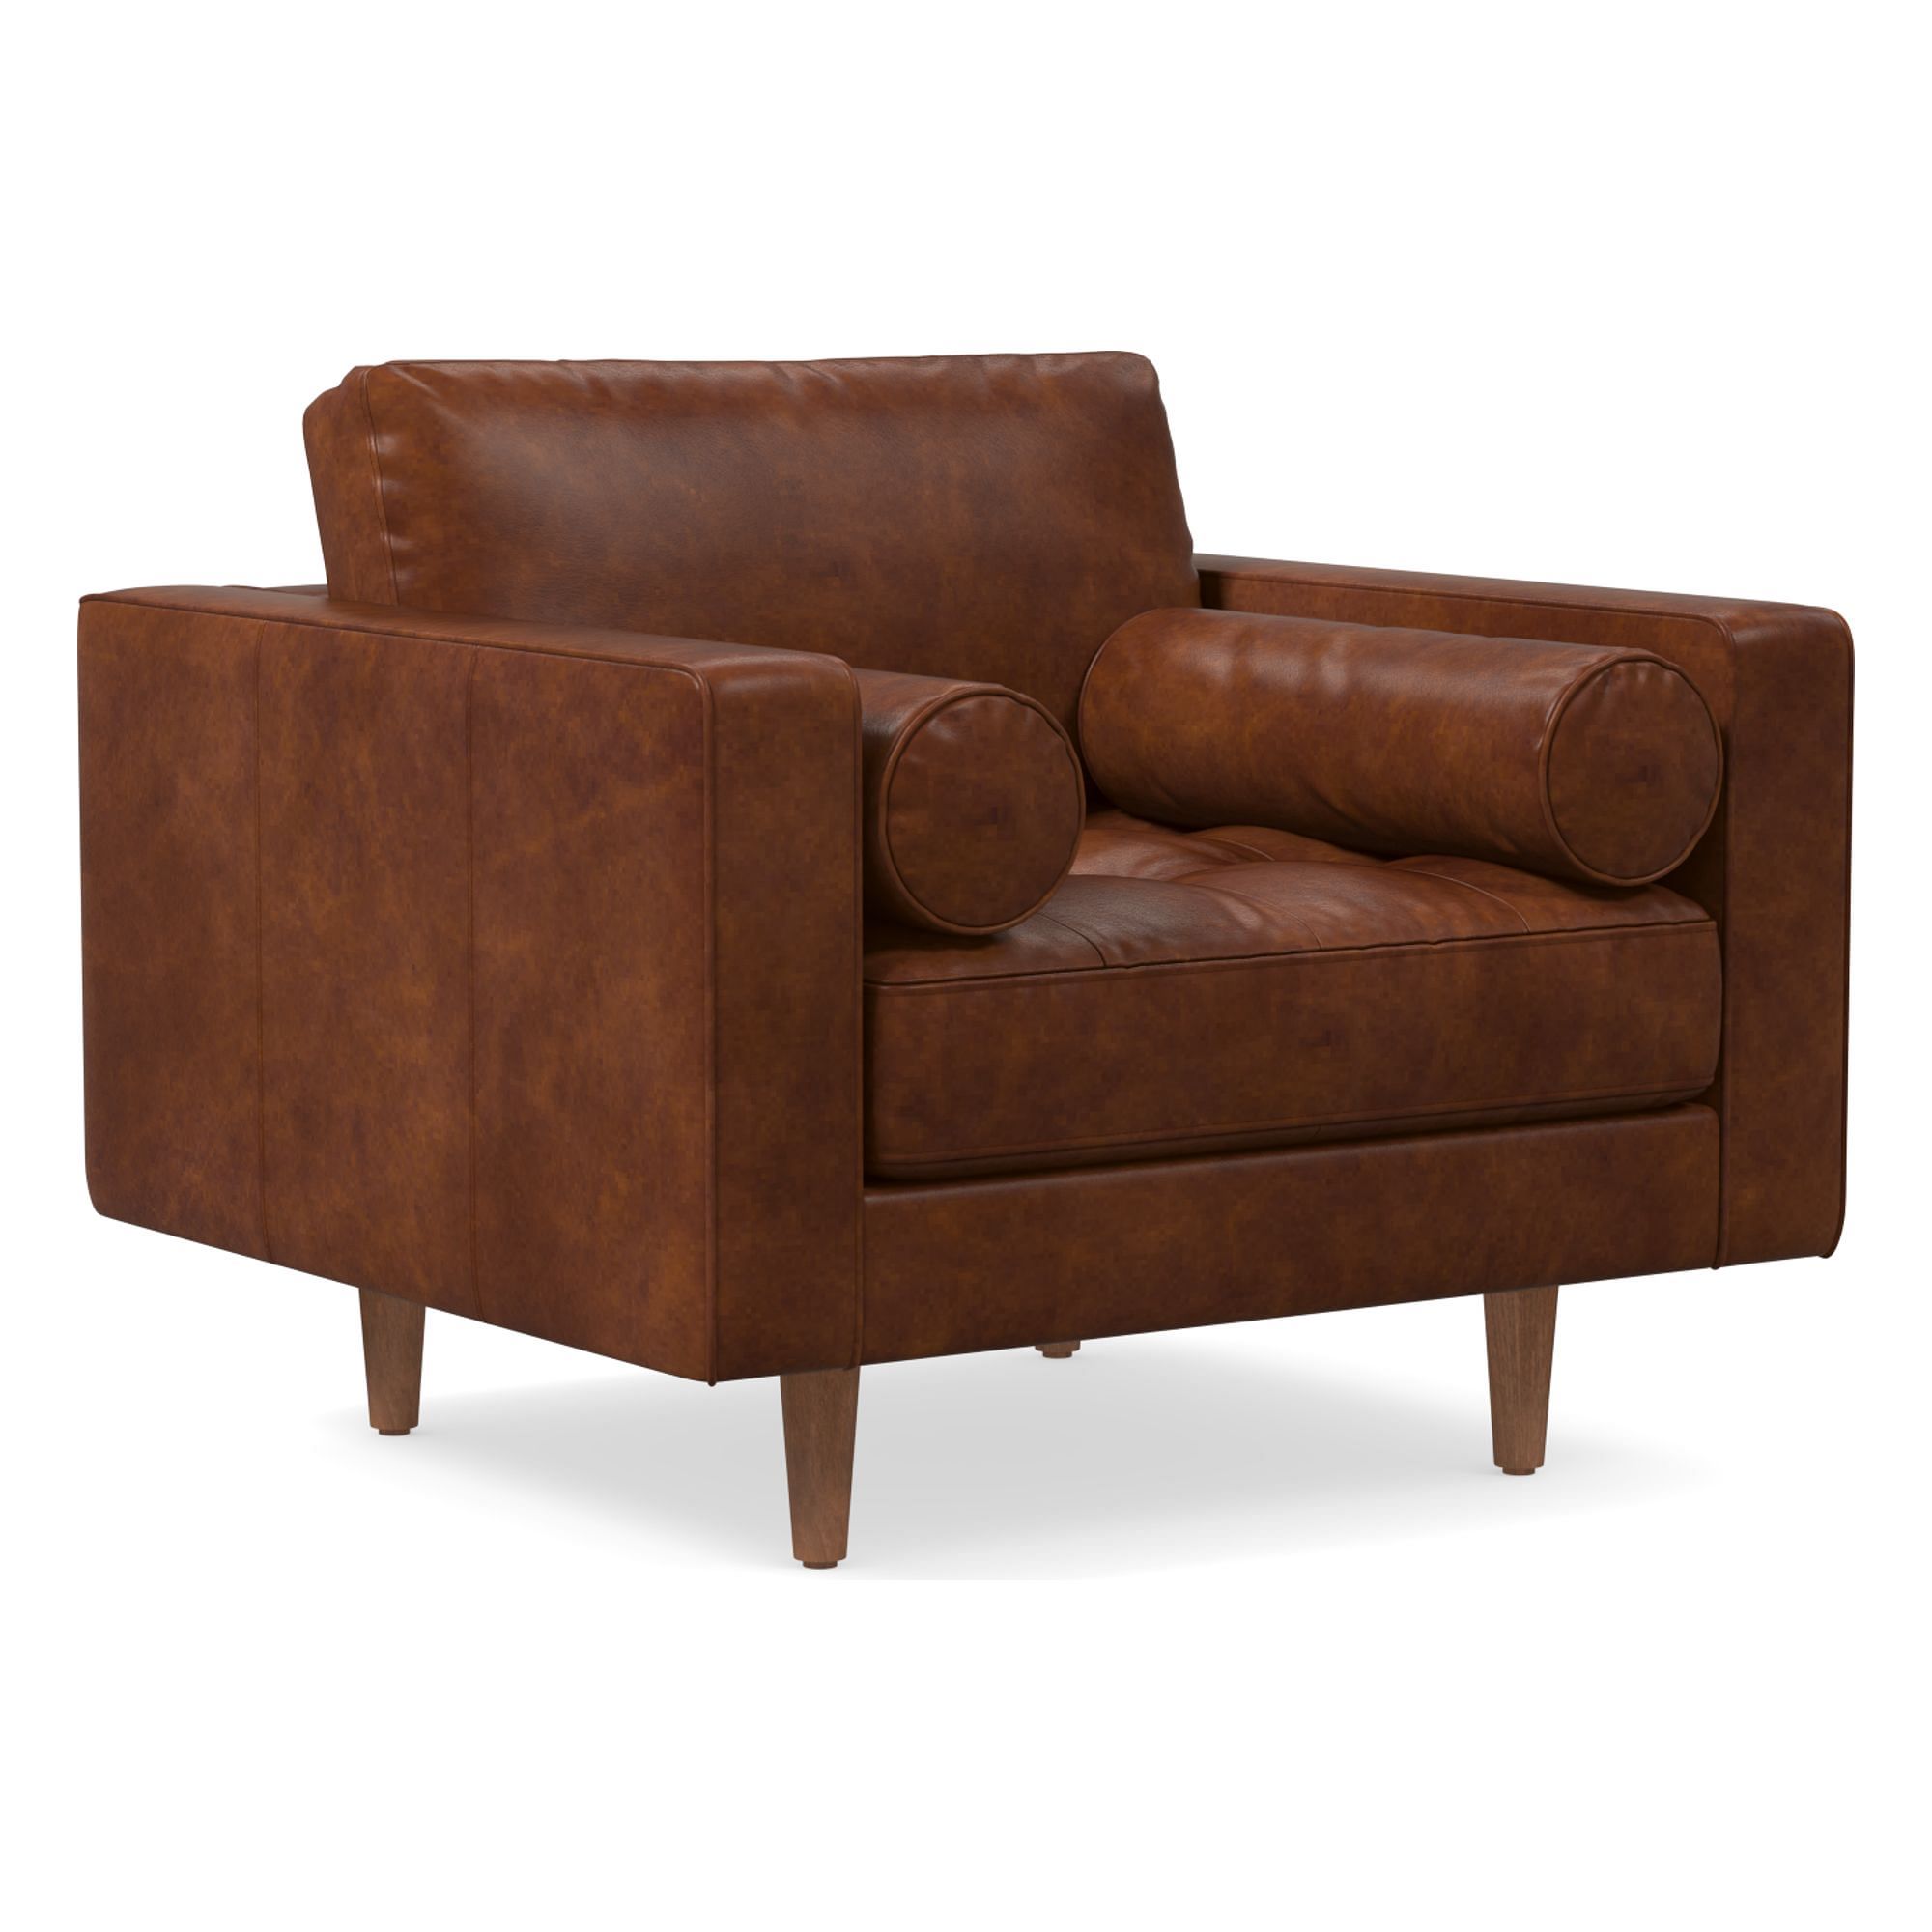 Dennes Leather Chair | West Elm